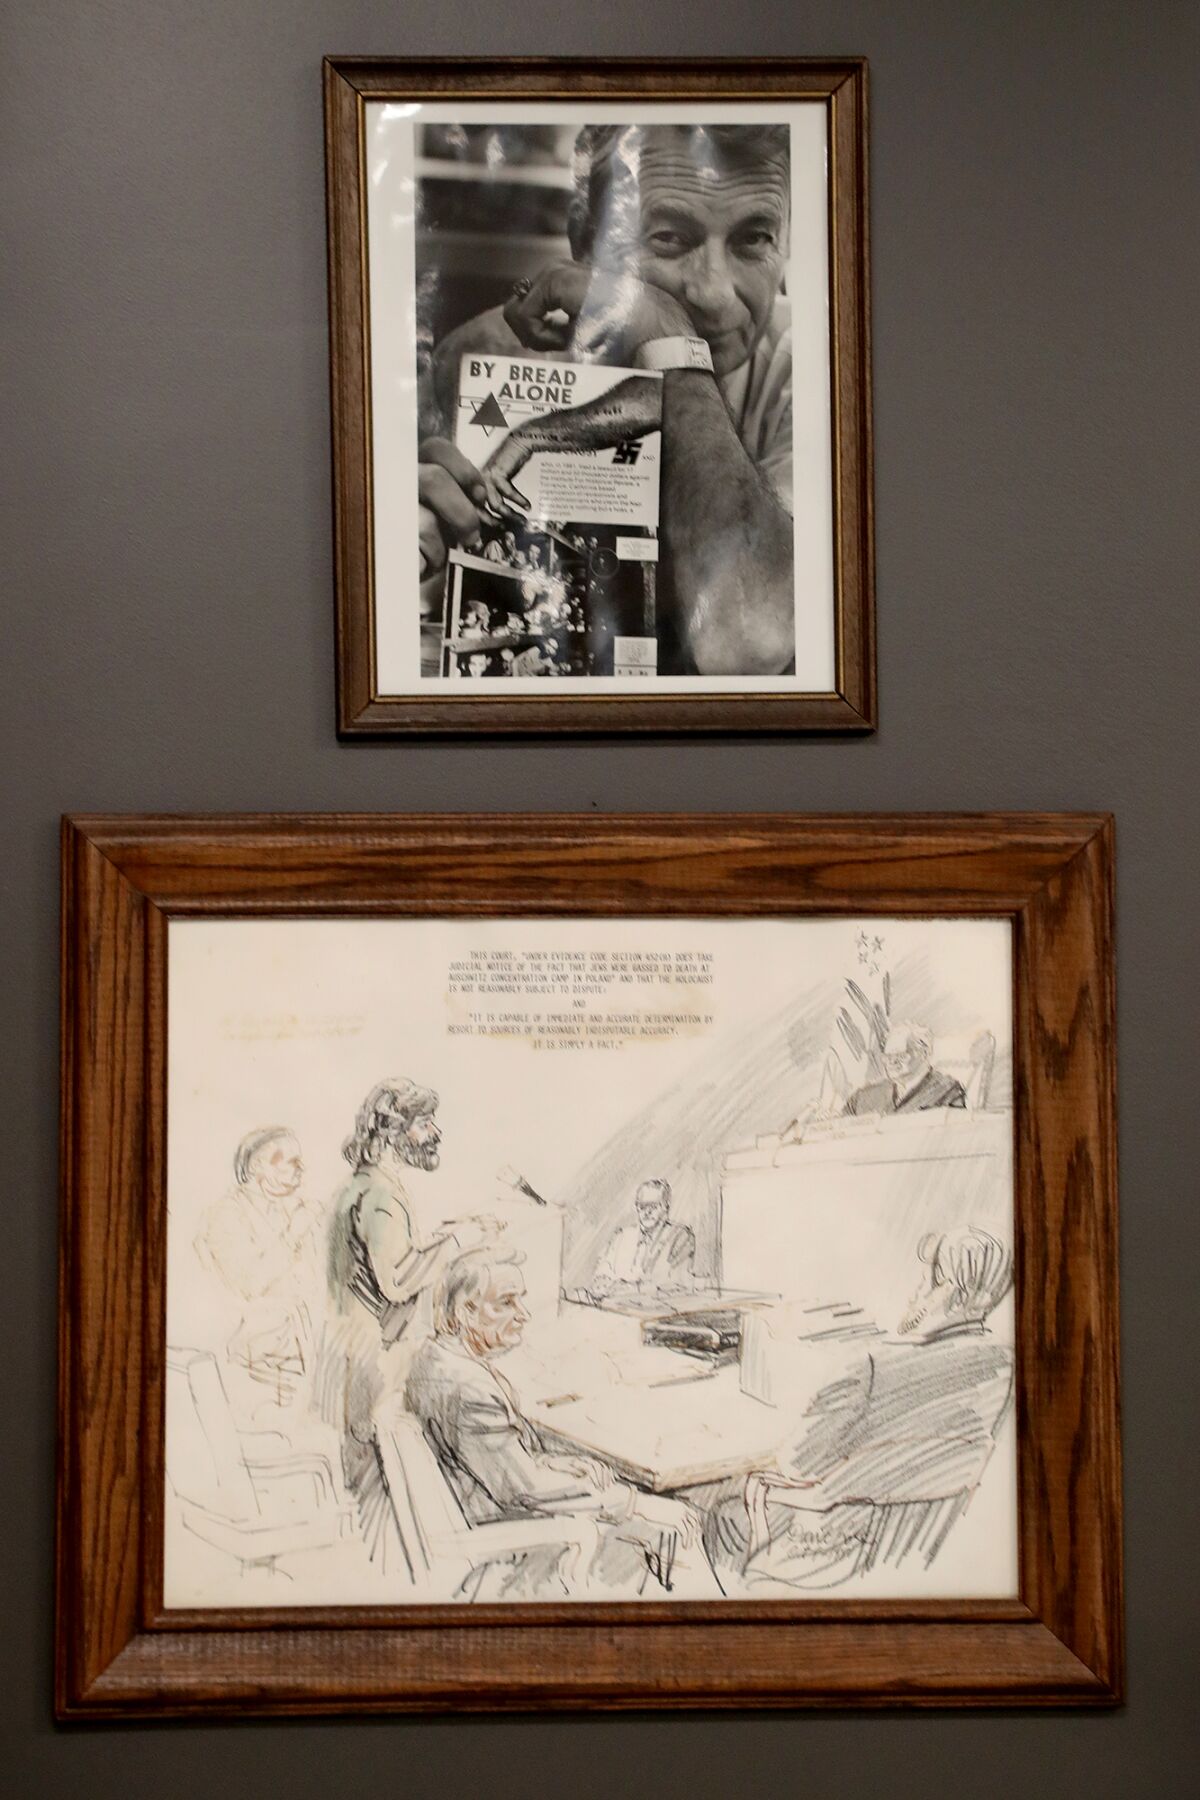 A picture of Mel Mermelstein above a sketch of Holocaust deniers displayed at Chabad Center for Jewish Life in Newport Beach.